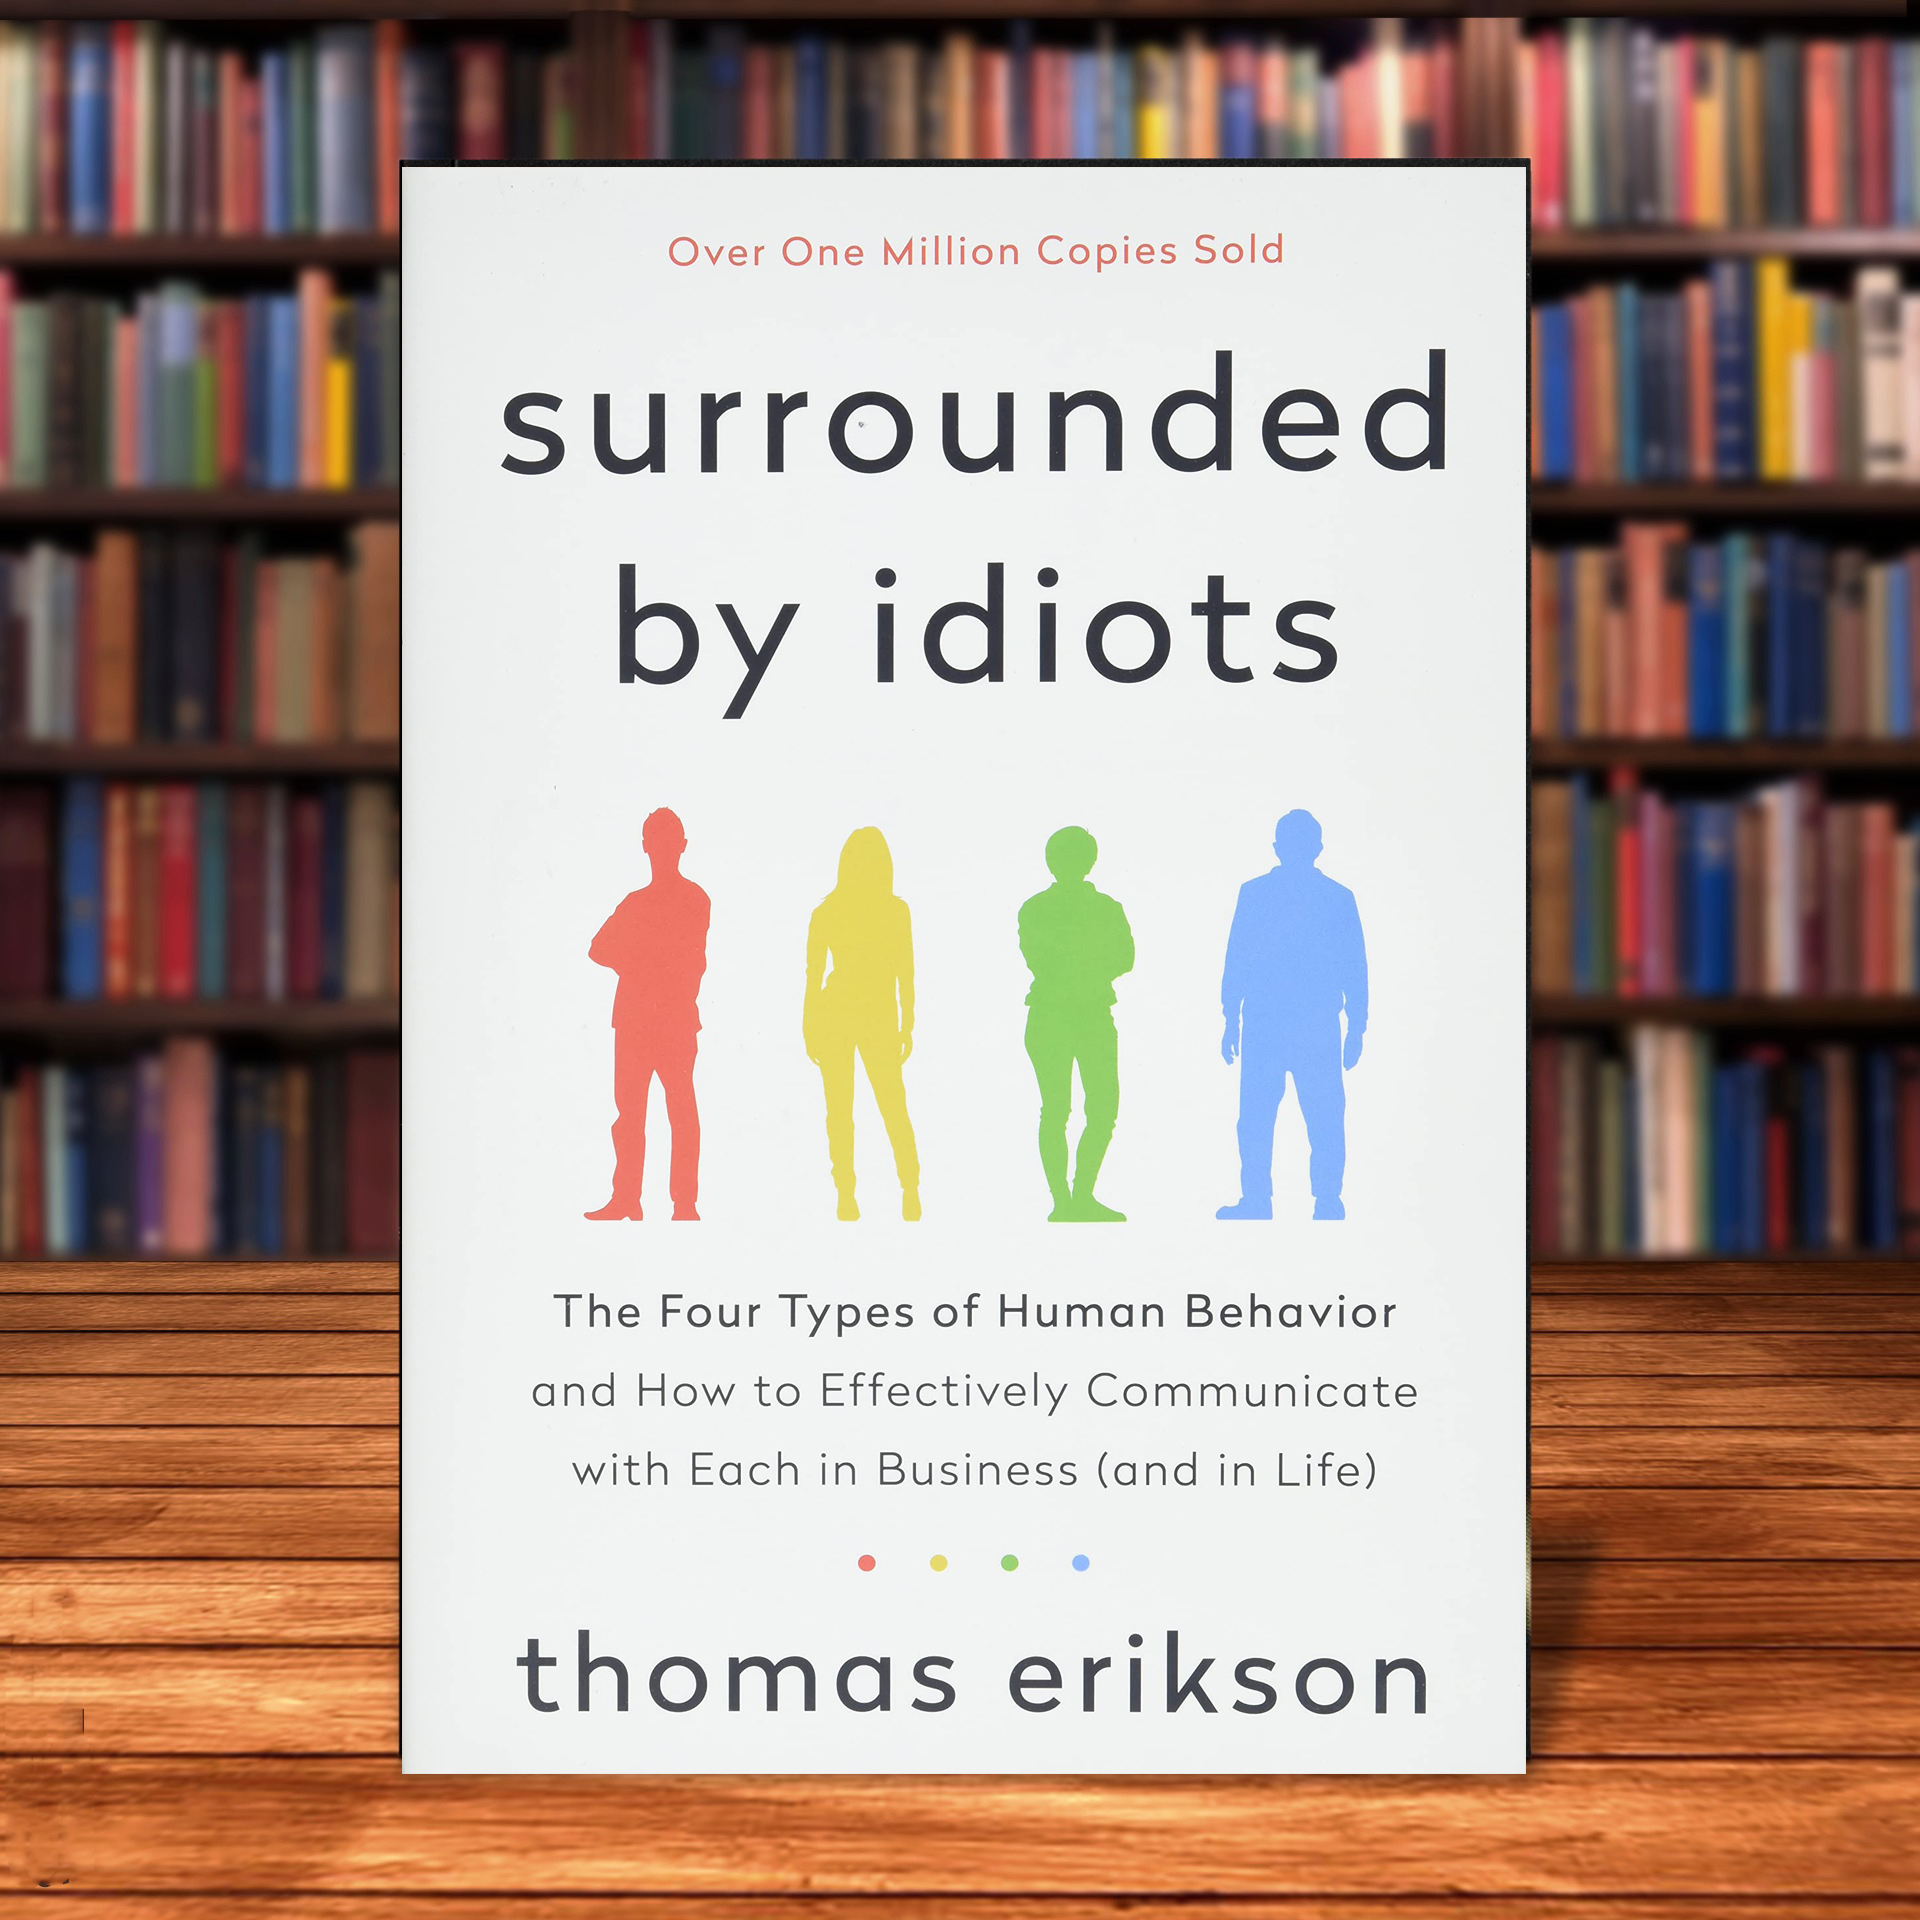 Surrounded ^ idiots